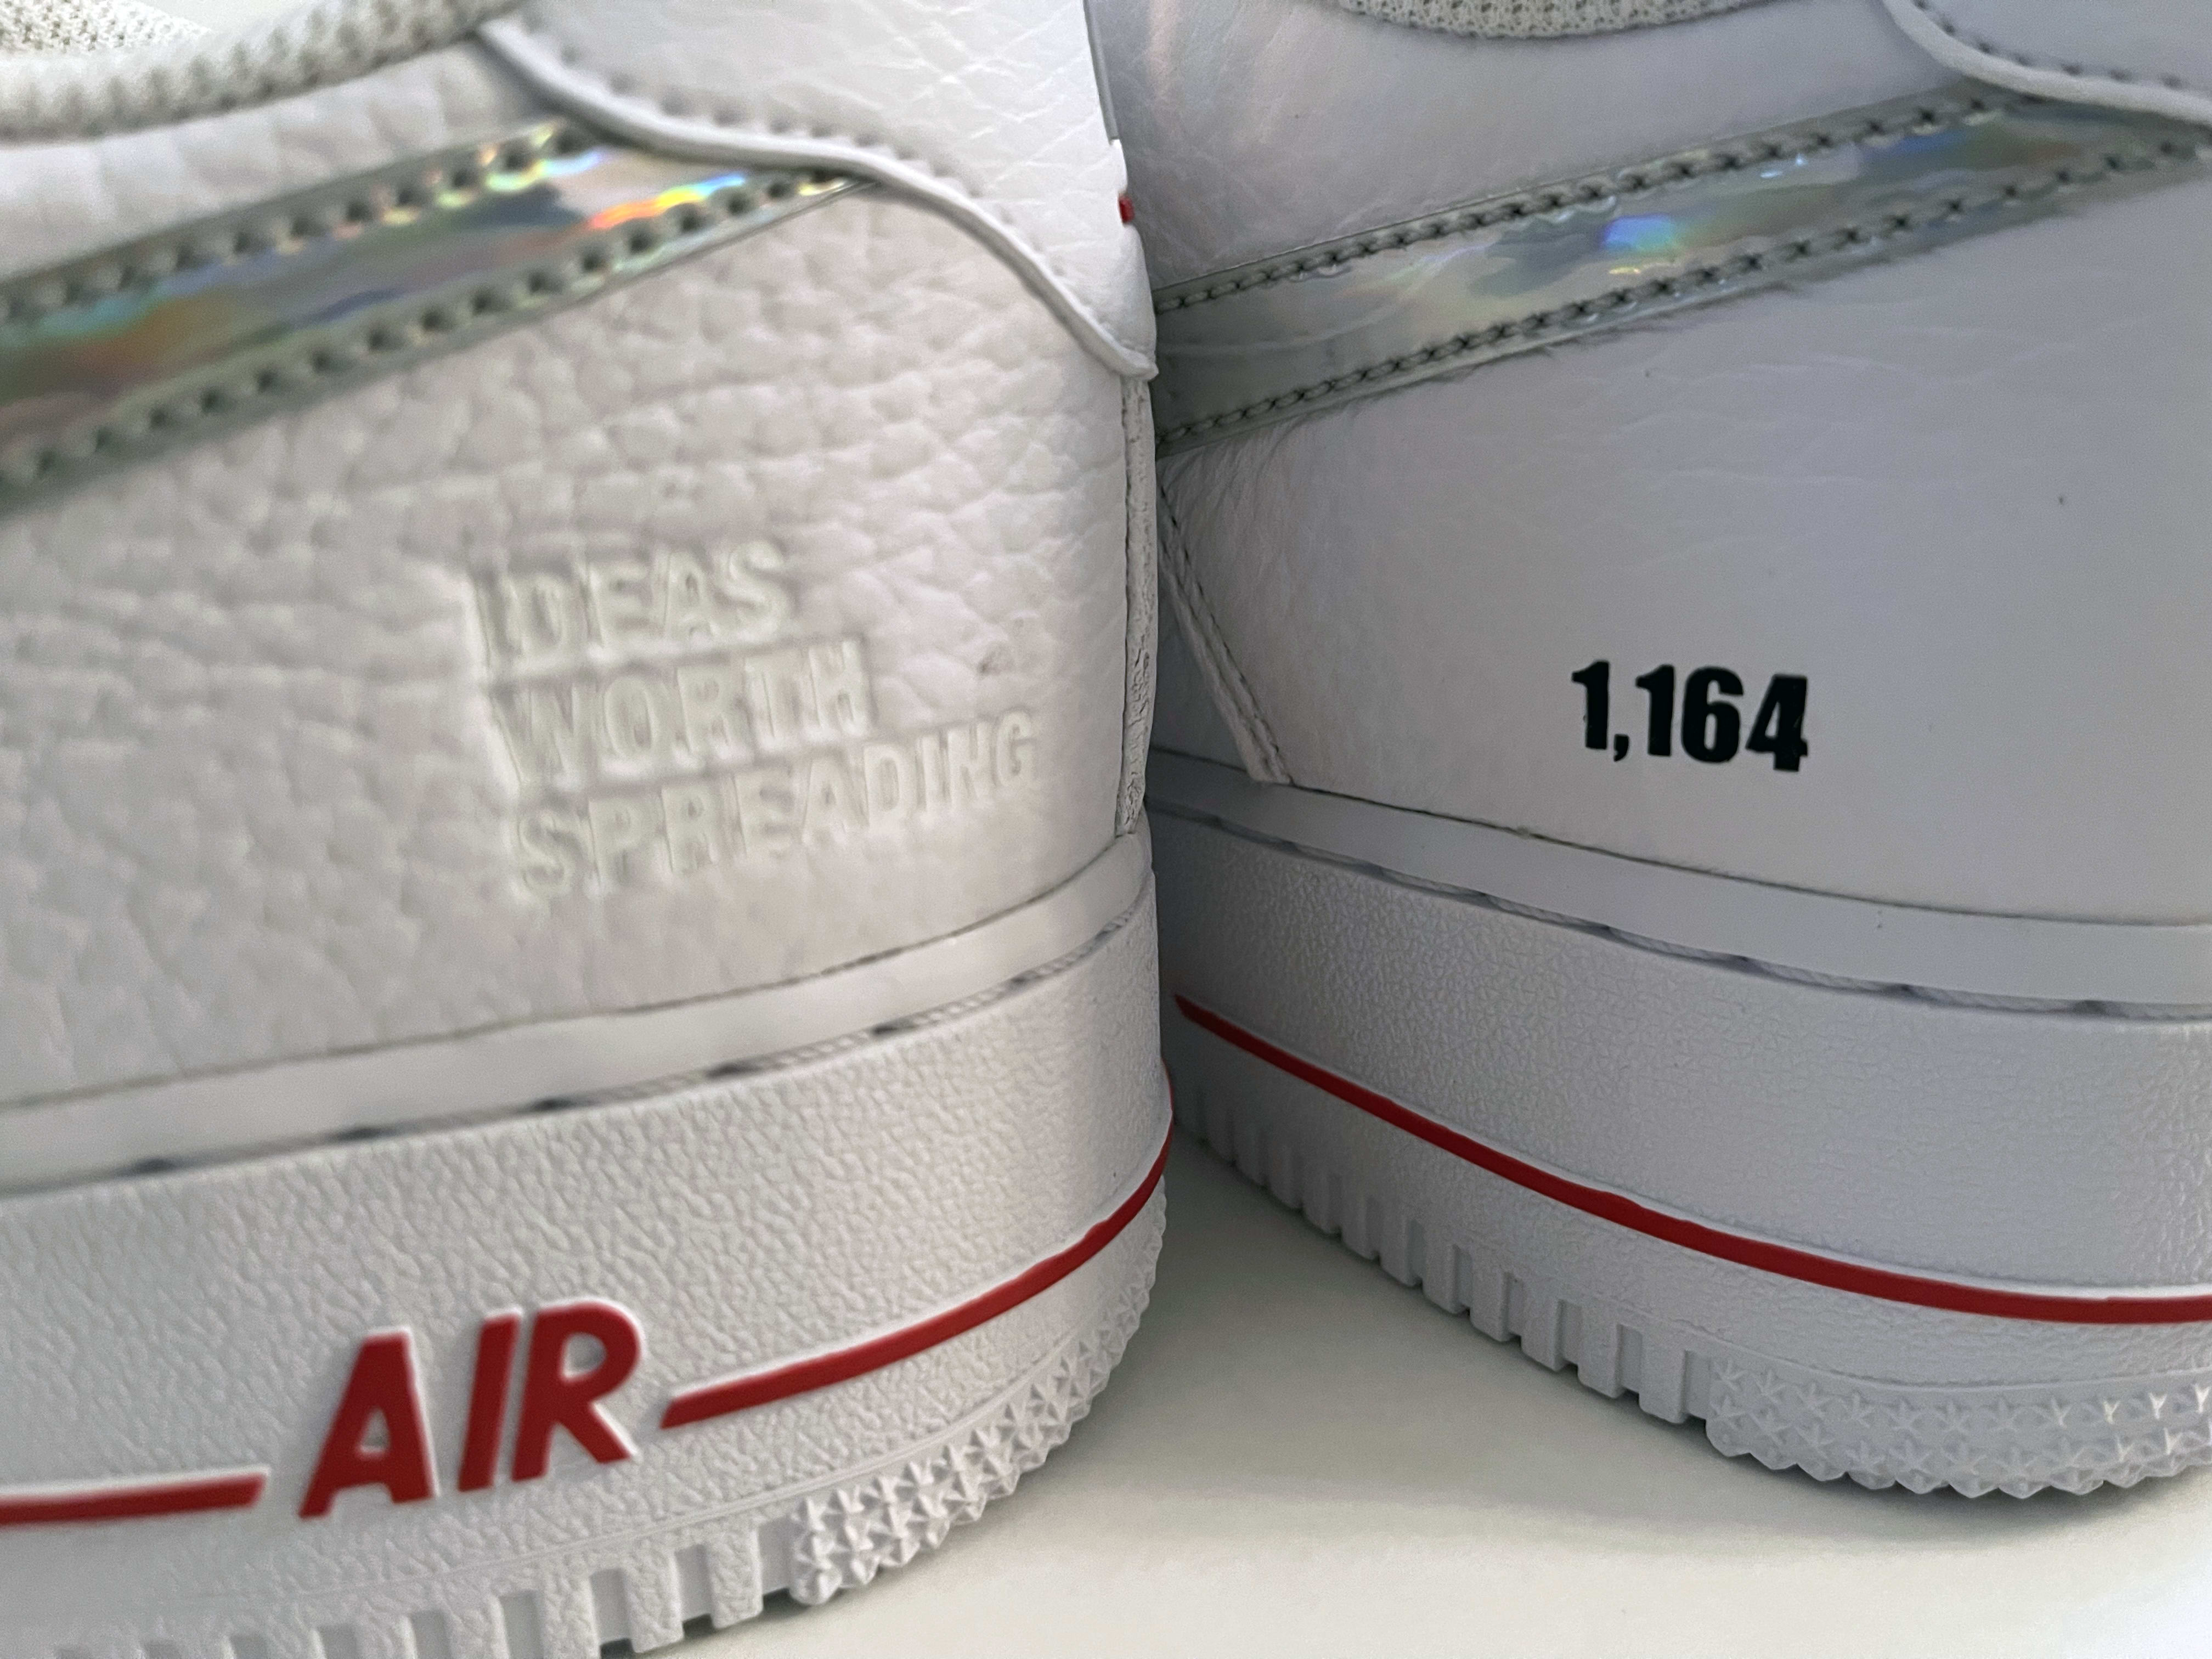 TEDxPortland x Nike Air Force 1 Low